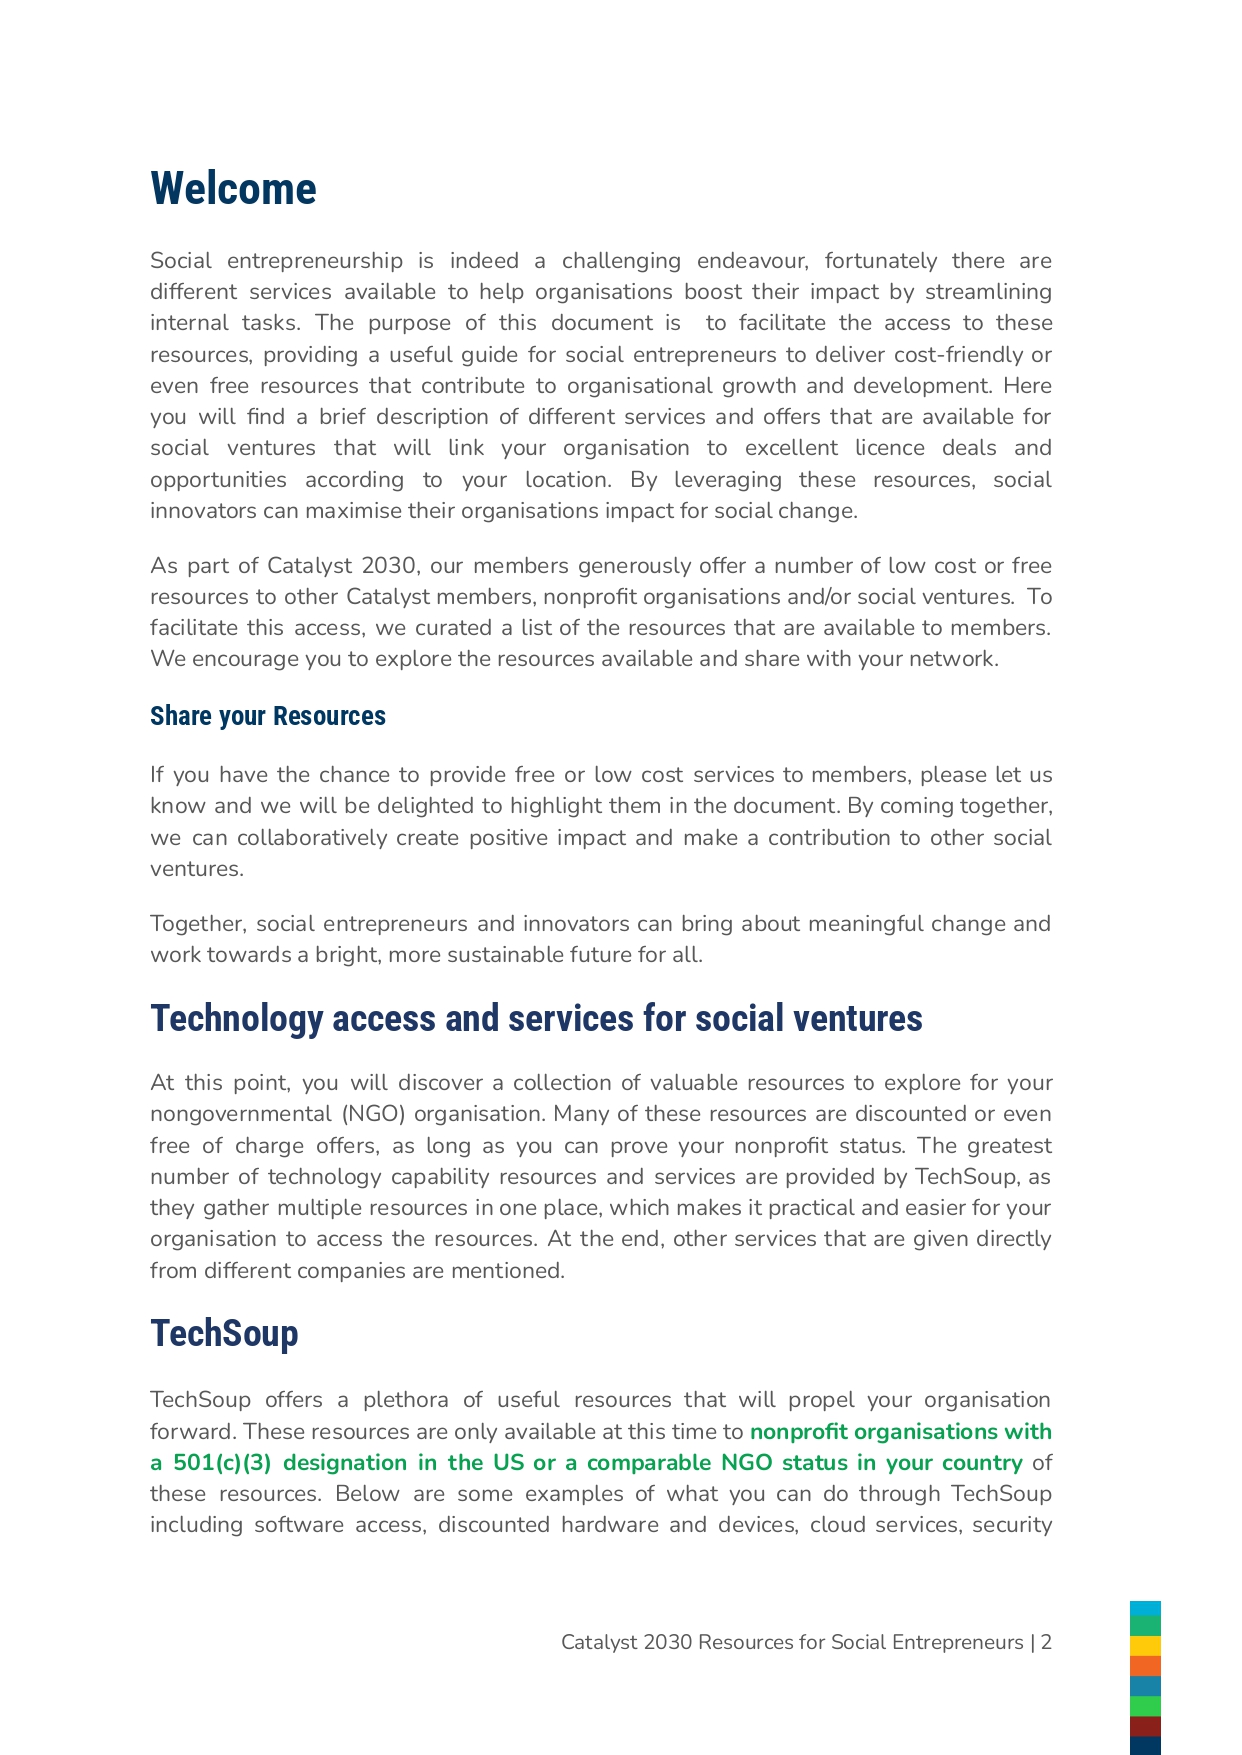 Technology Empowerment for NGOs and Social Entrepreneurs content extract